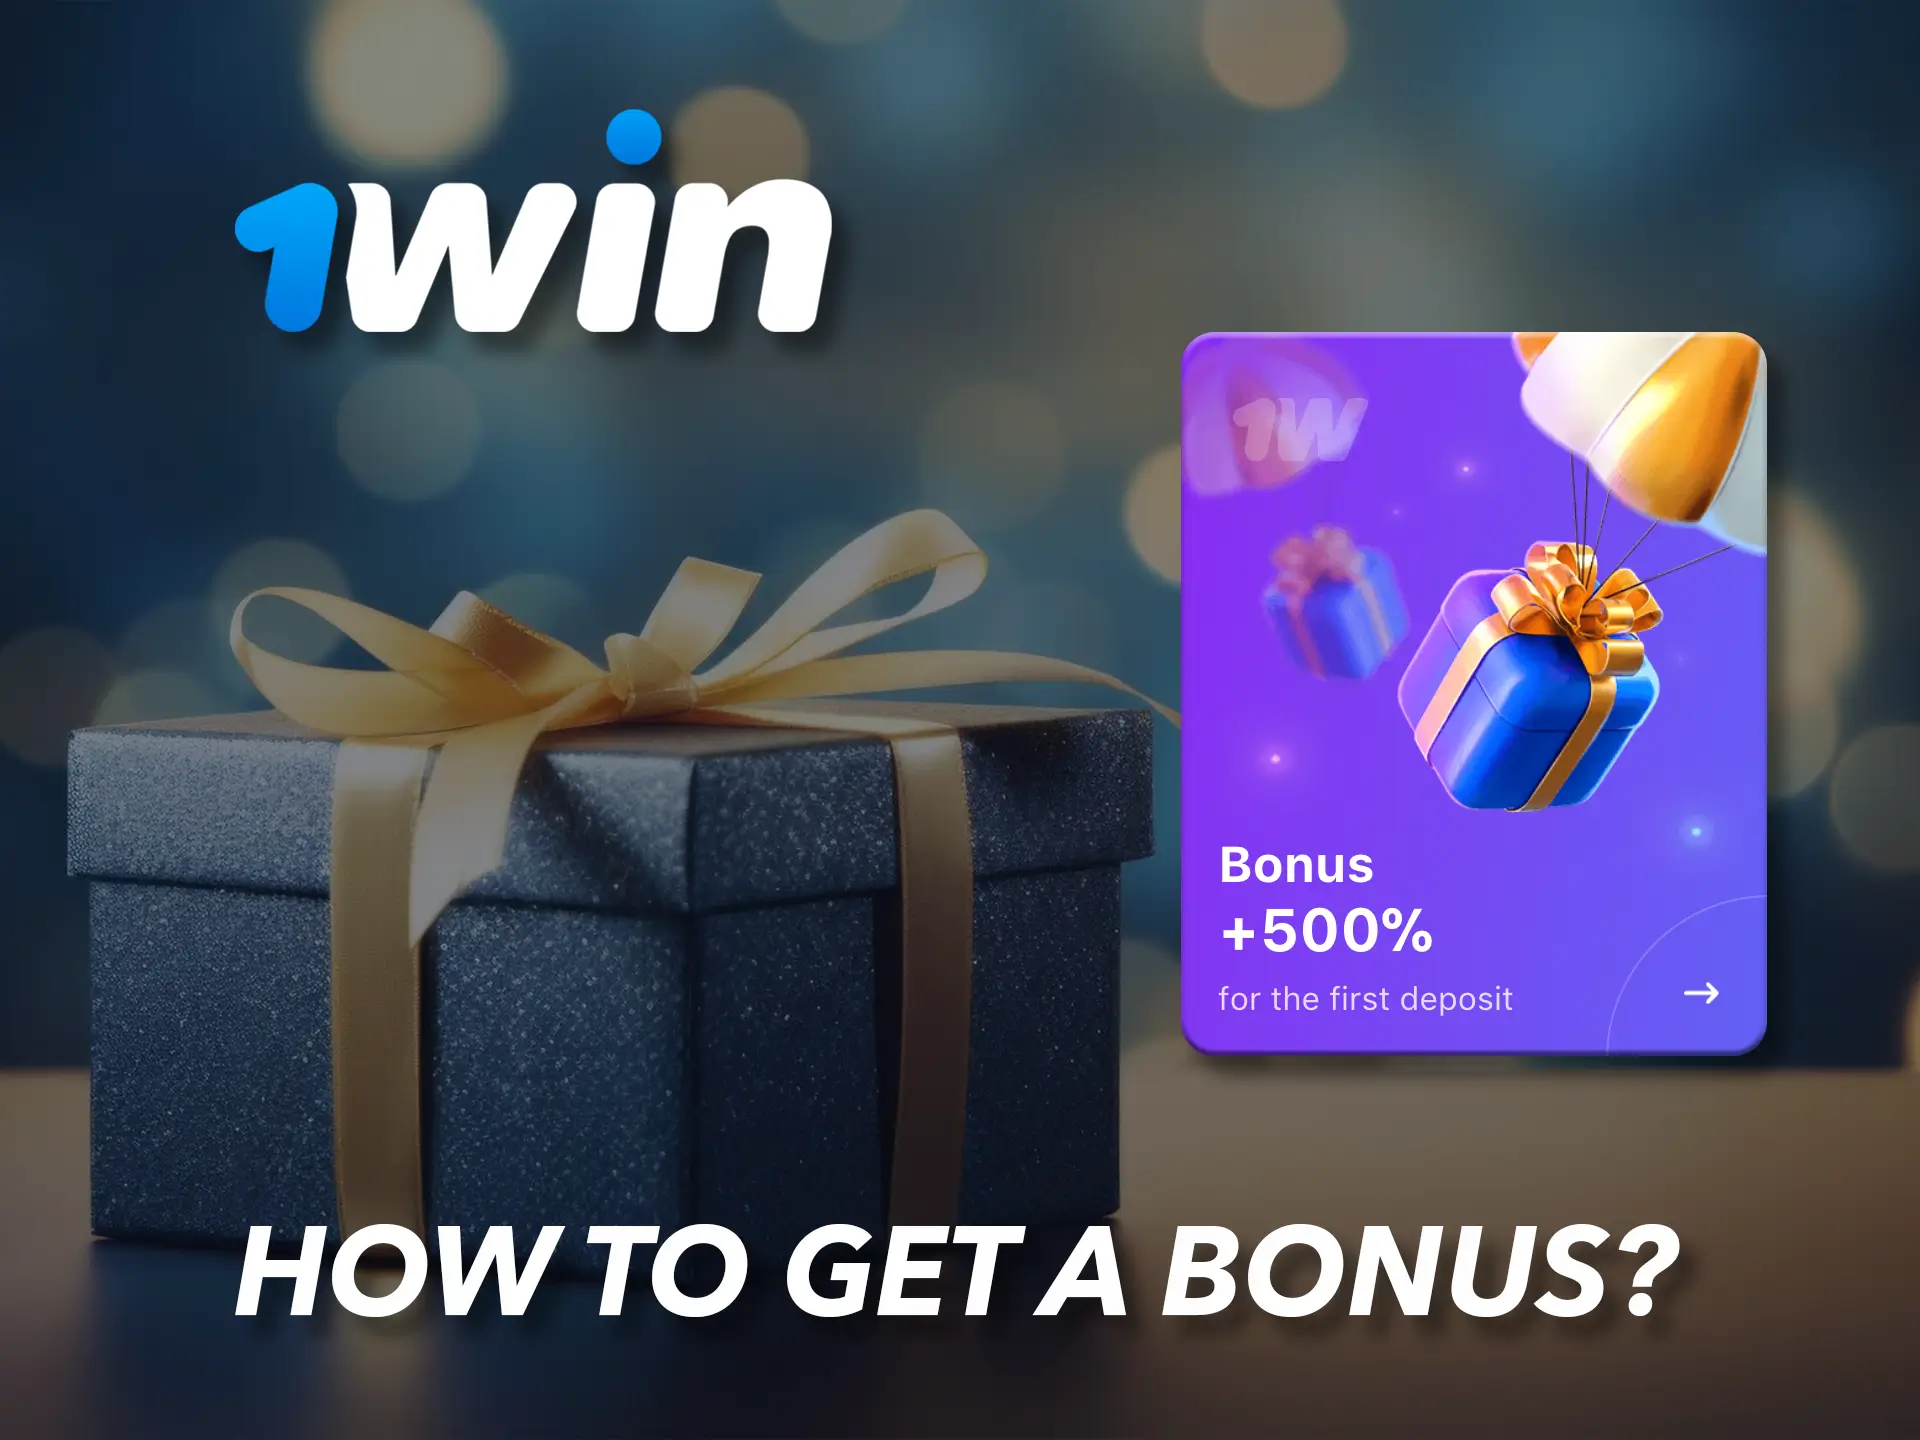 Get your long-awaited bonus from 1Win as soon as you sign up and make your first deposit.